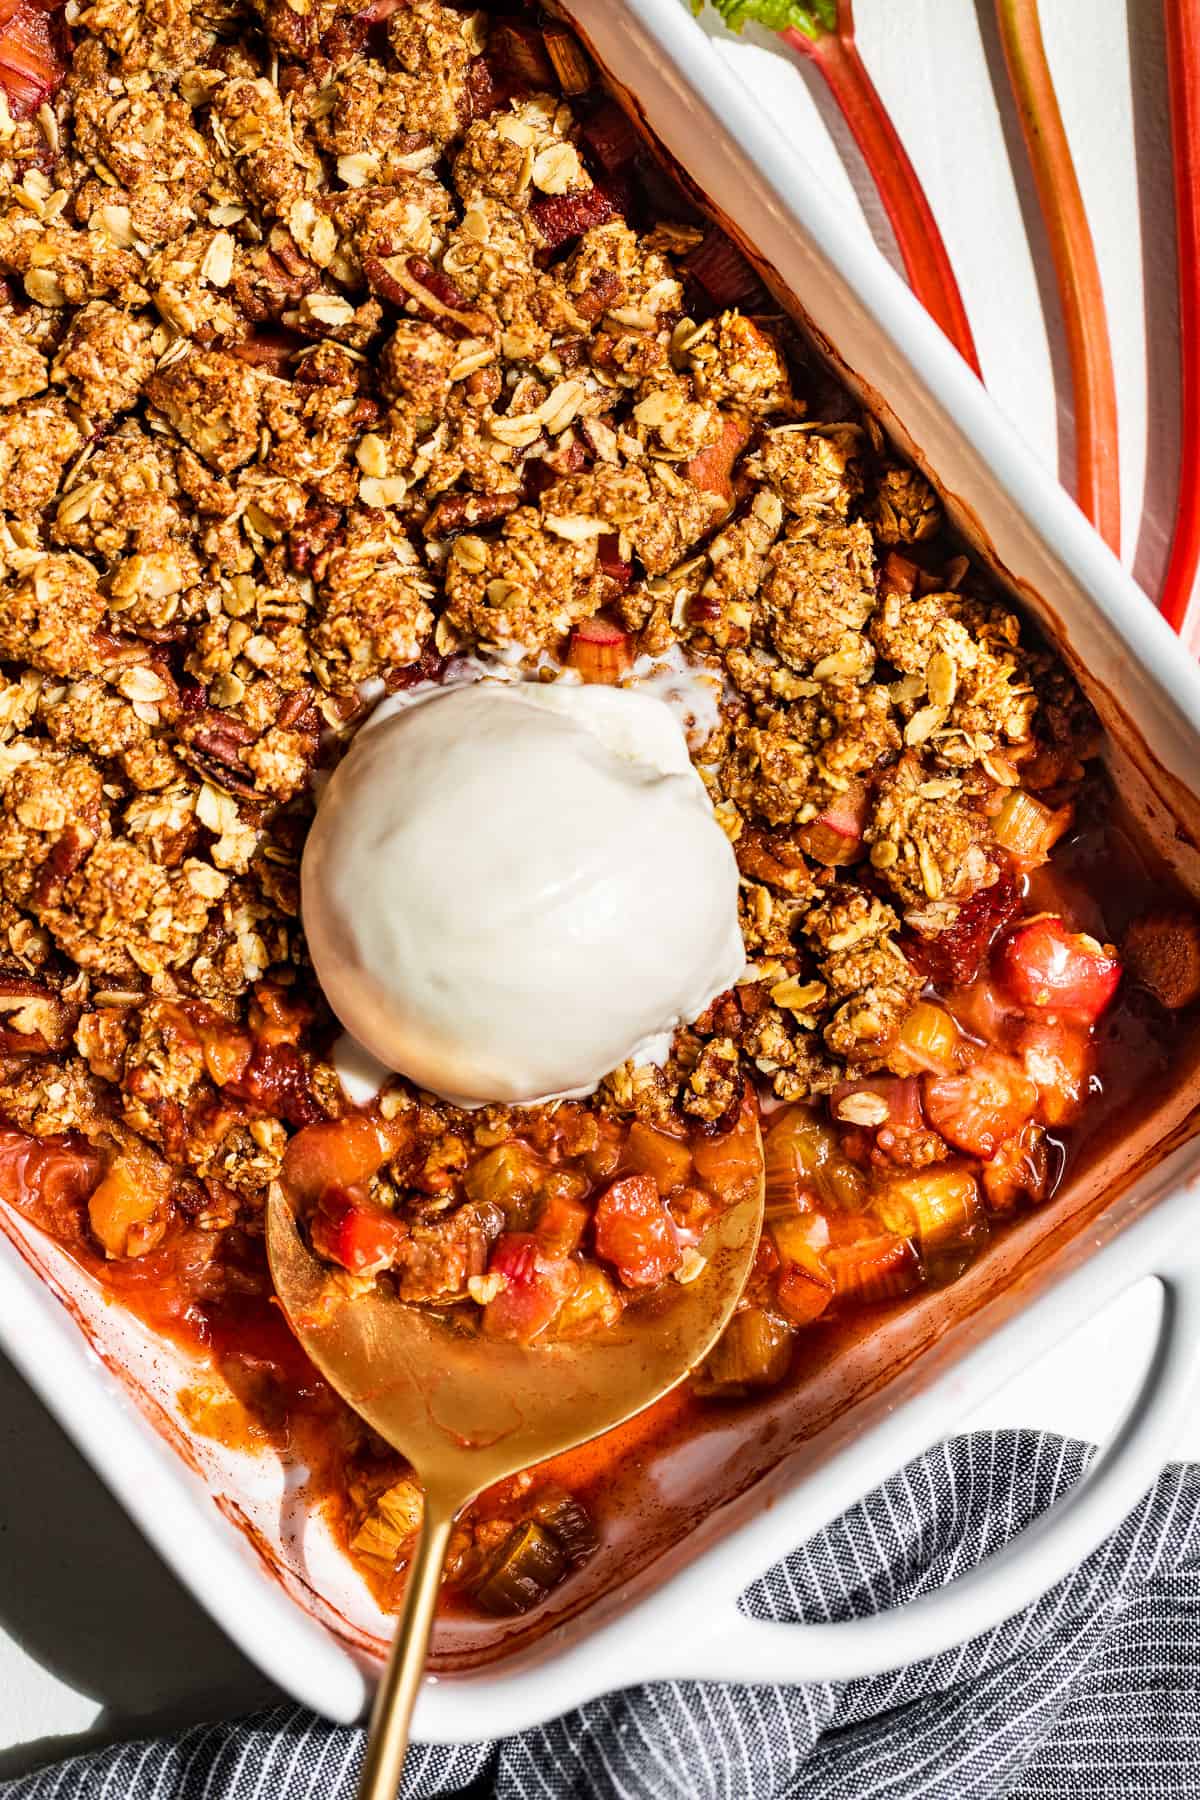 Strawberry Rhubarb Crisp in a white baking dish with a large scoop of ice cream and a gold serving spoon.